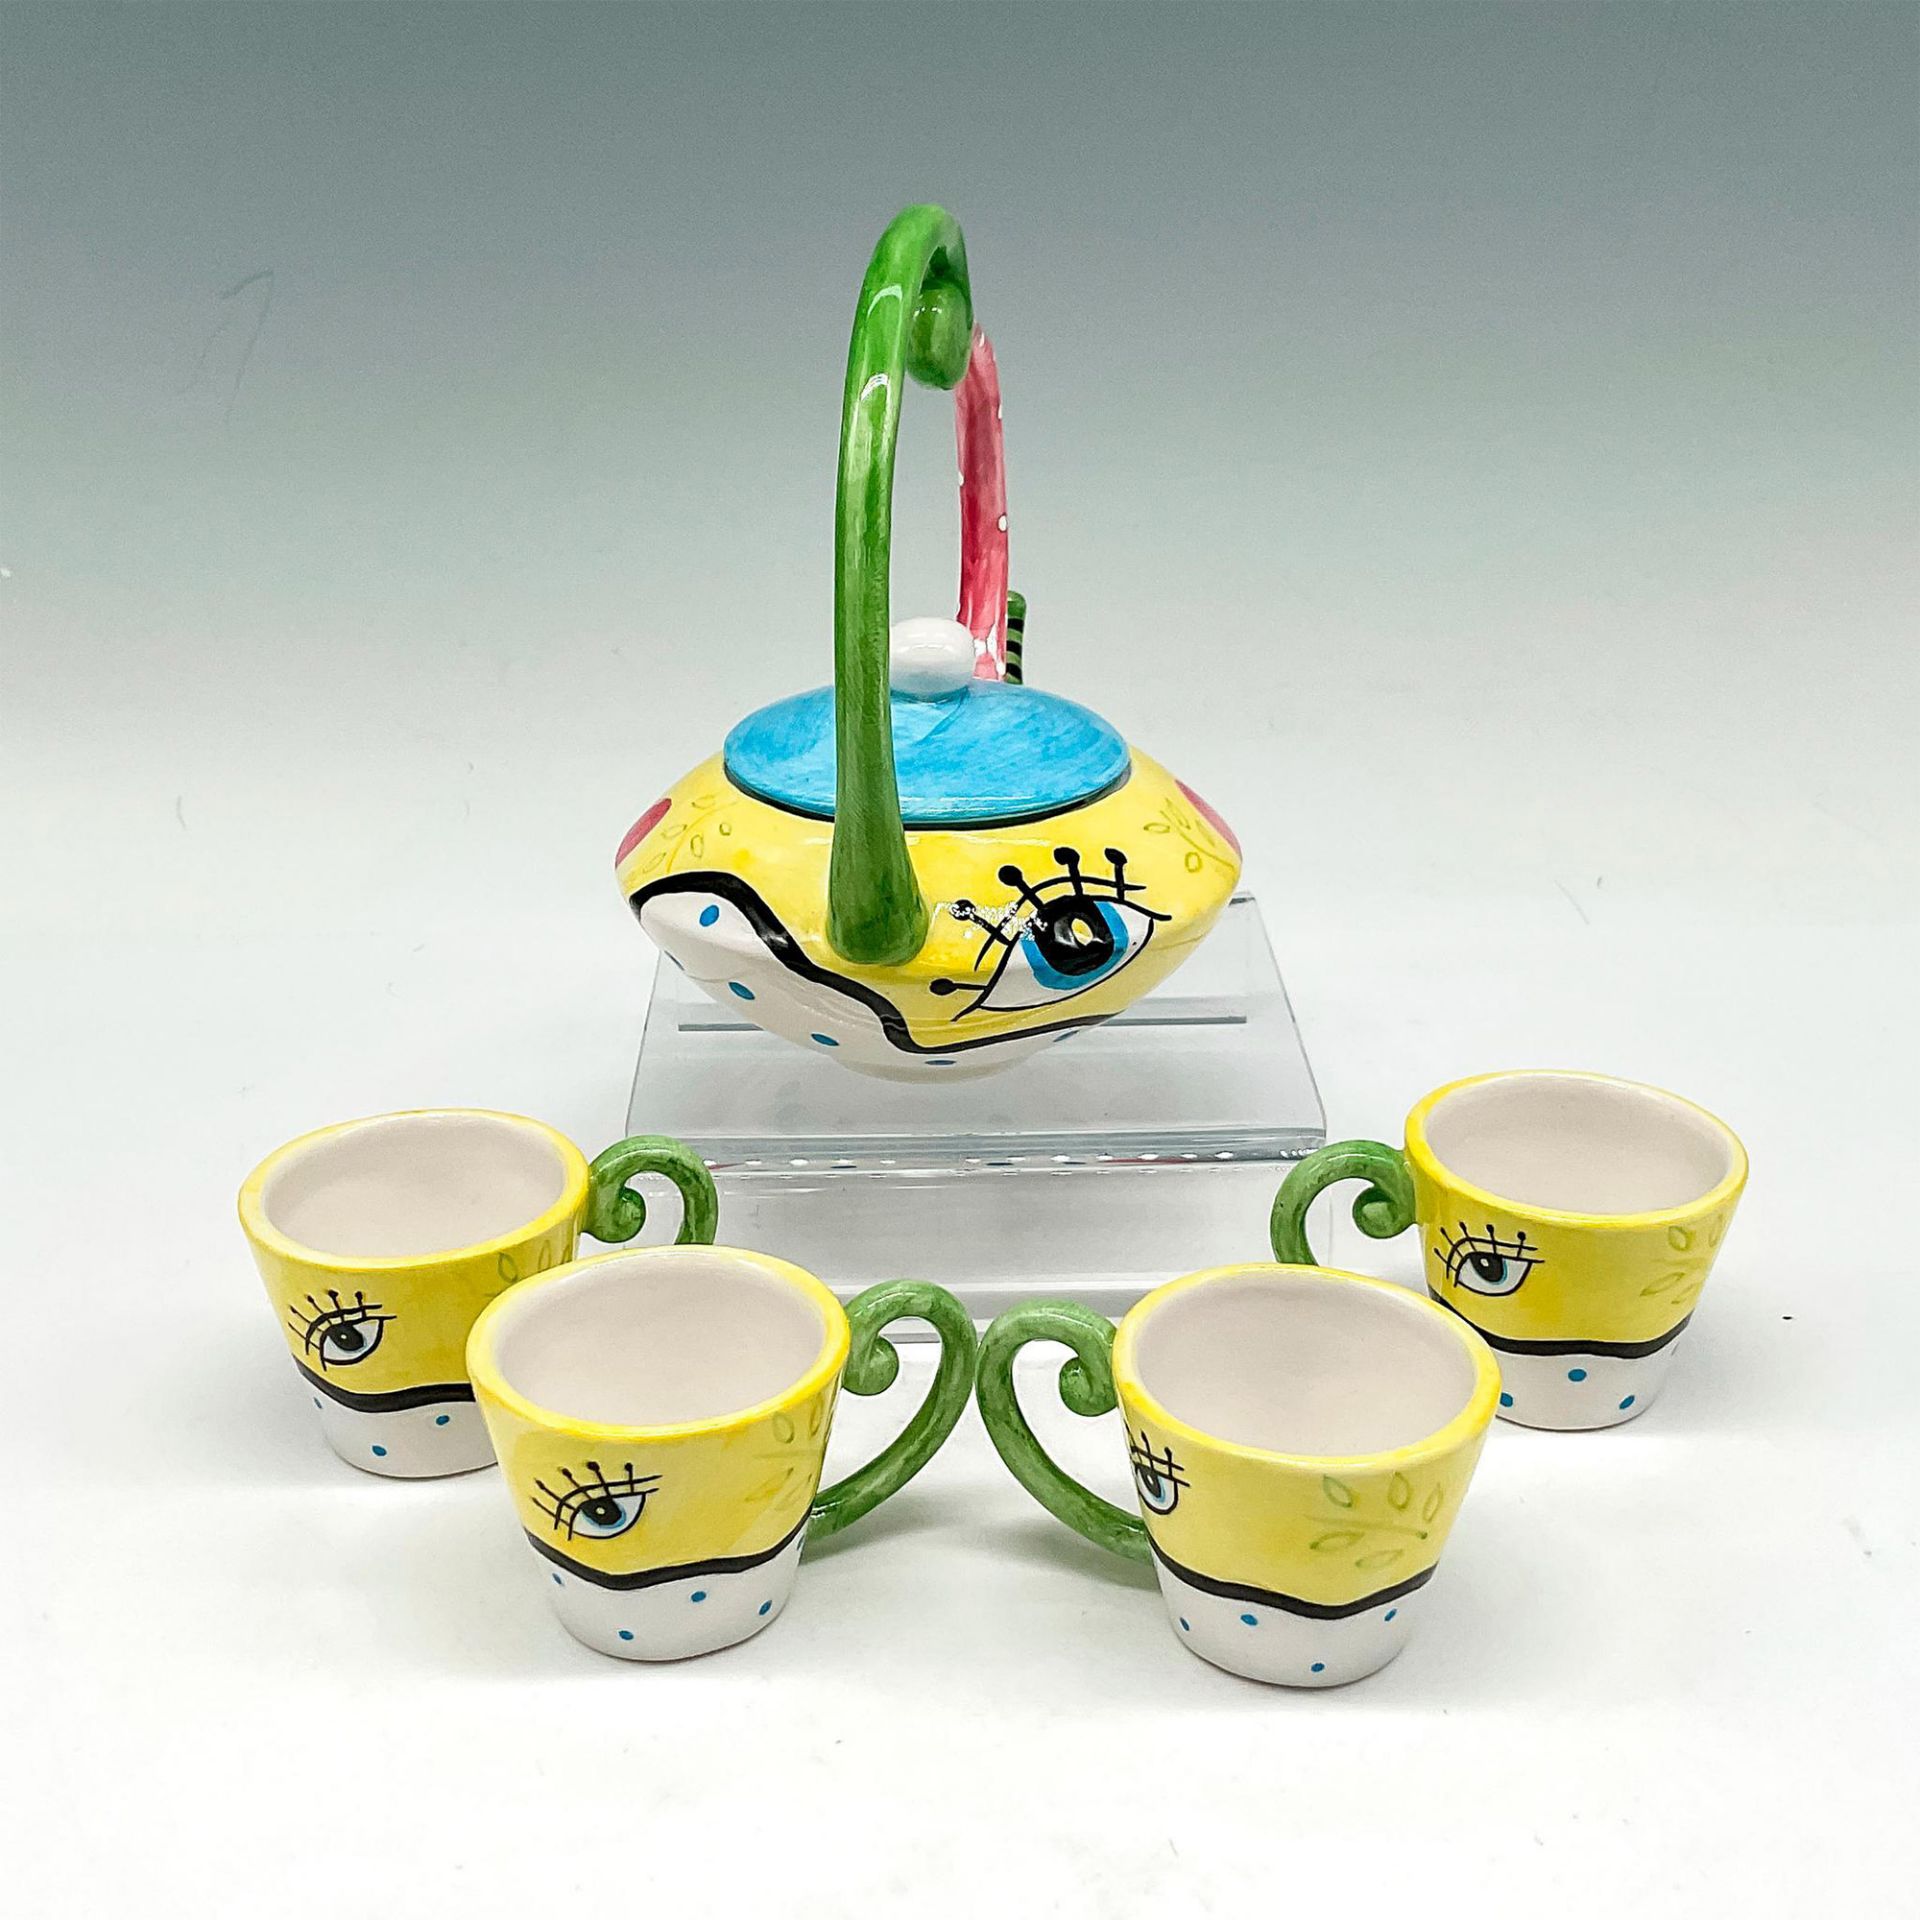 5pc Miniature Ceramic Teapot and Cups - Image 2 of 2